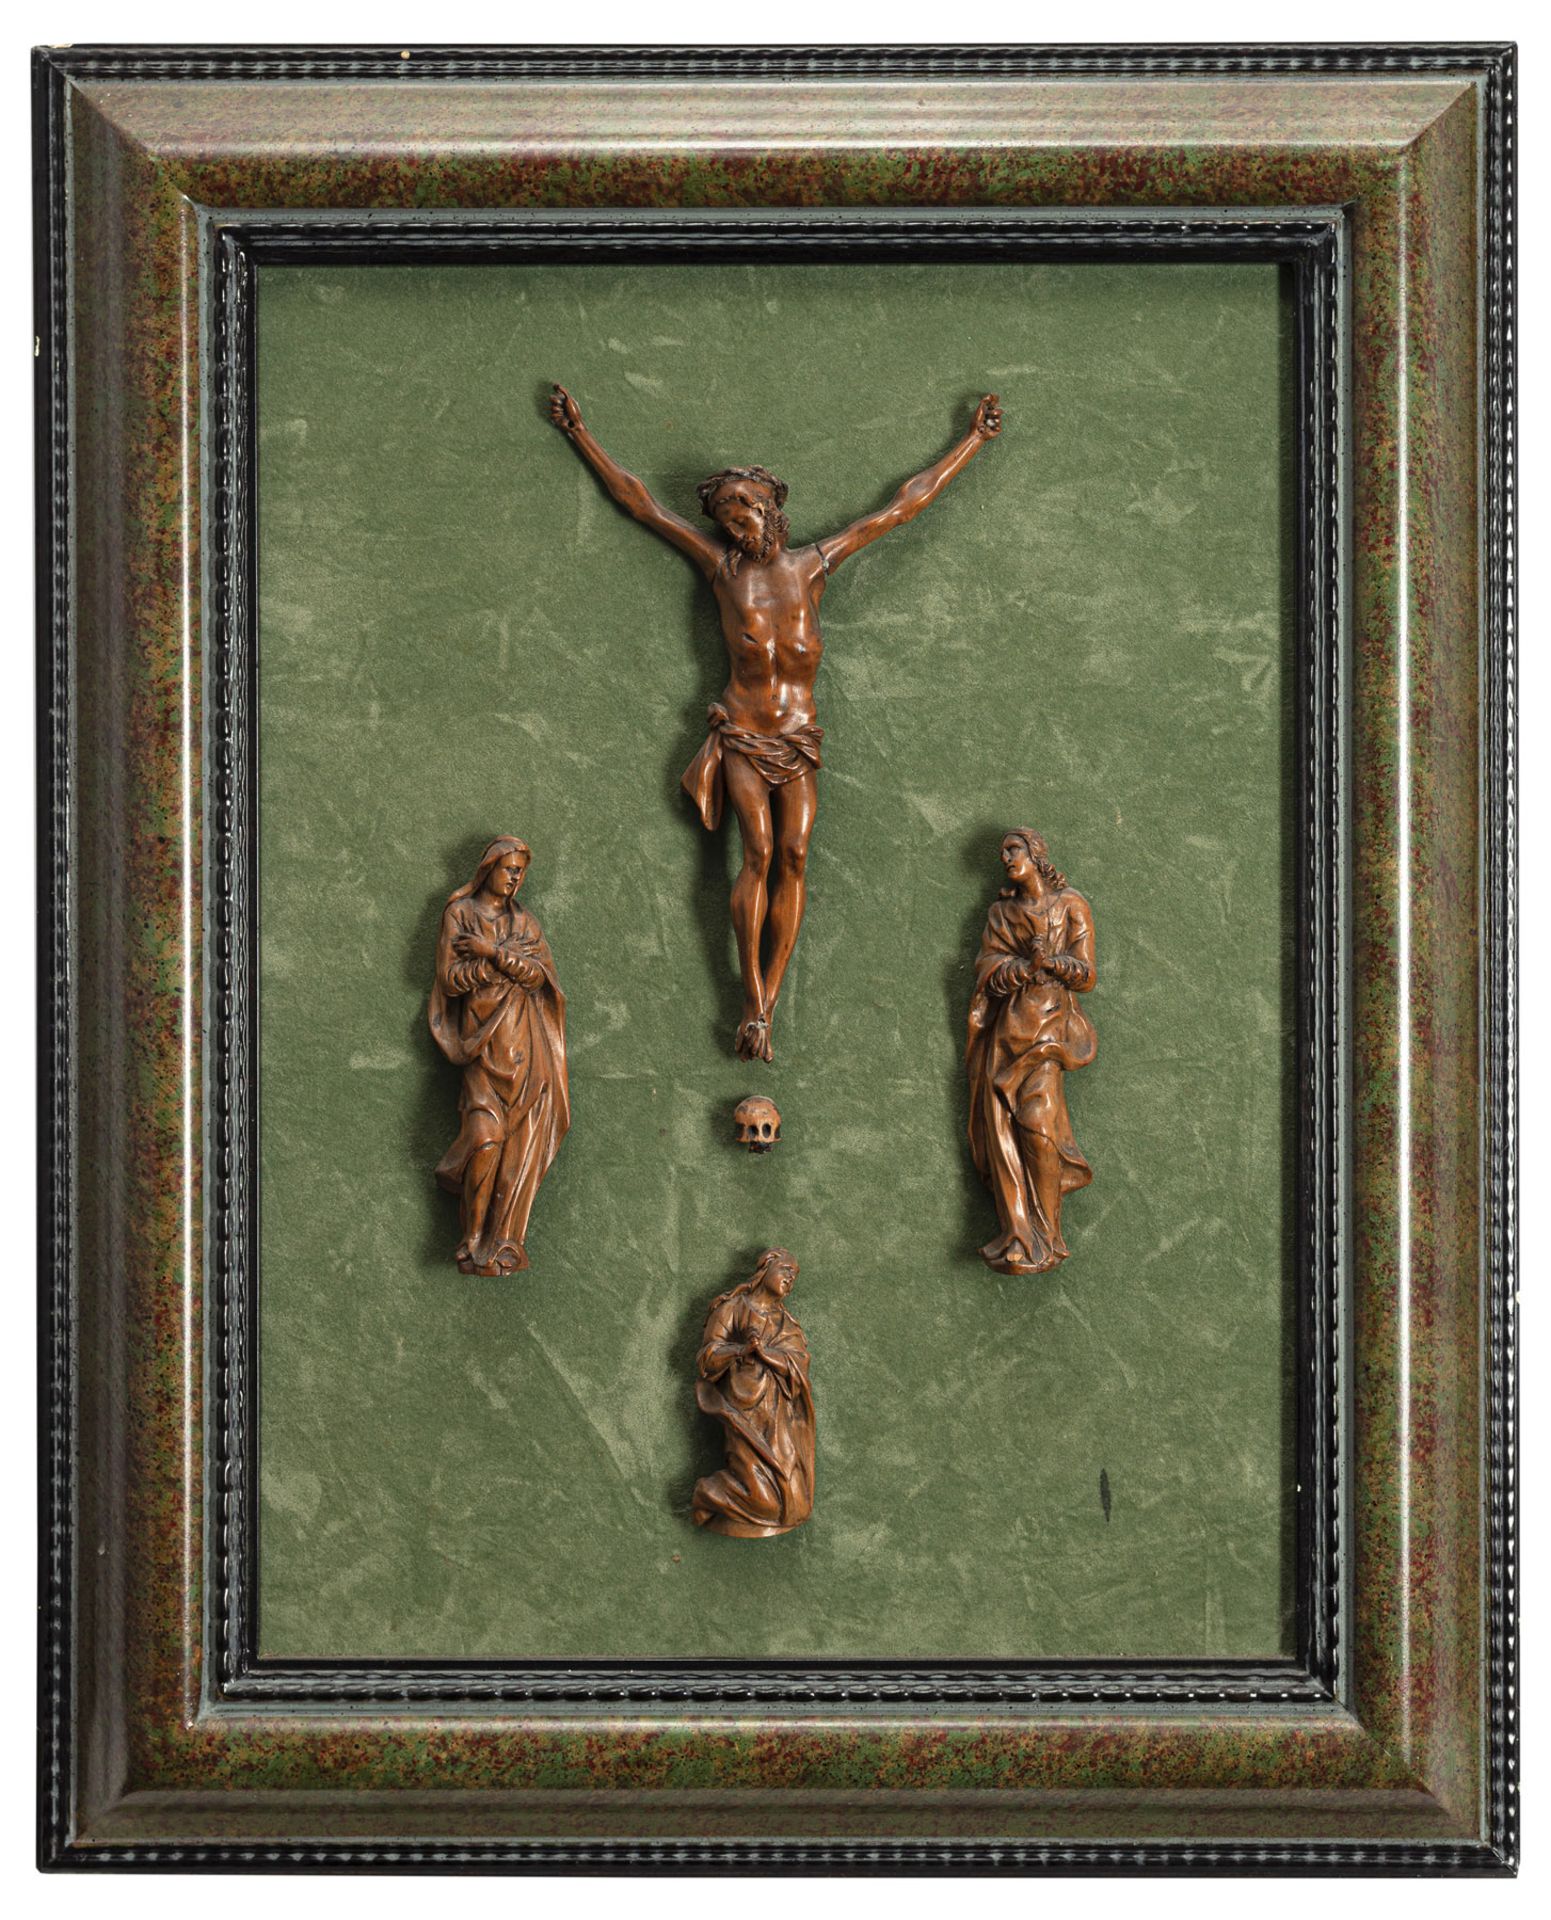 FOUR FIGURINES OF GOLGOTHA - Image 2 of 3